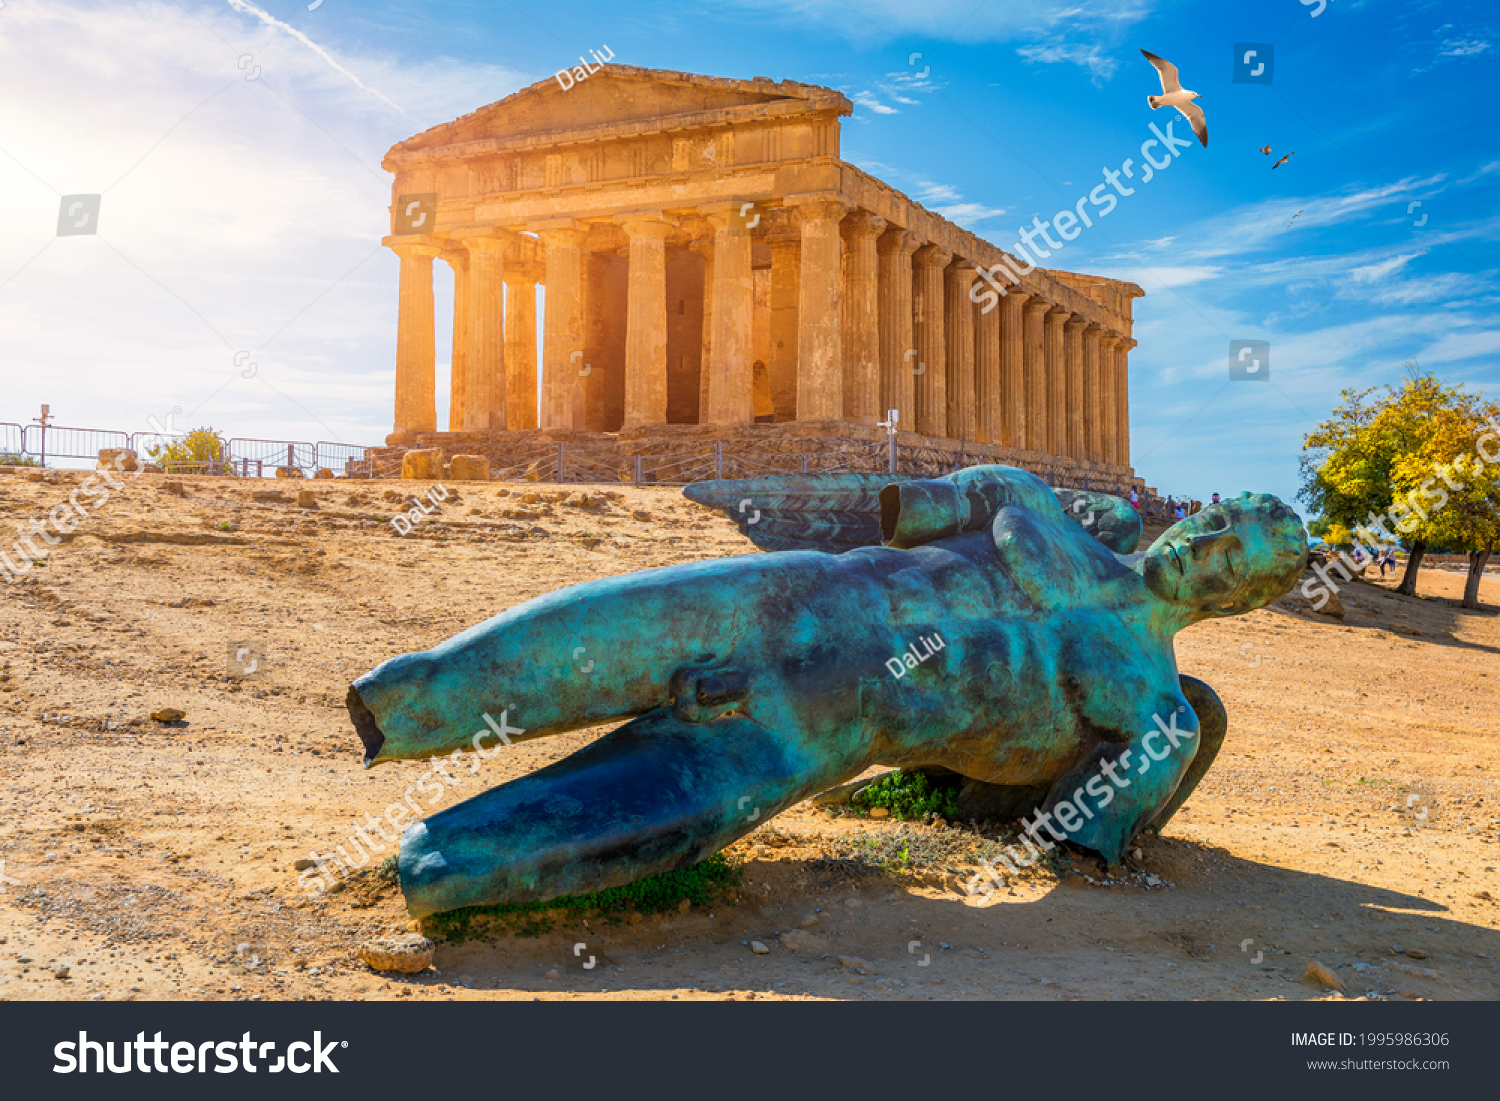 Bronze statue of Icarus in front of the Temple of Concordia at the Valley of the Temples. Temple of Concordia and the statue of Fallen Icarus, in the Valley of the Temples, Agrigento, Sicily, Italy. #1995986306